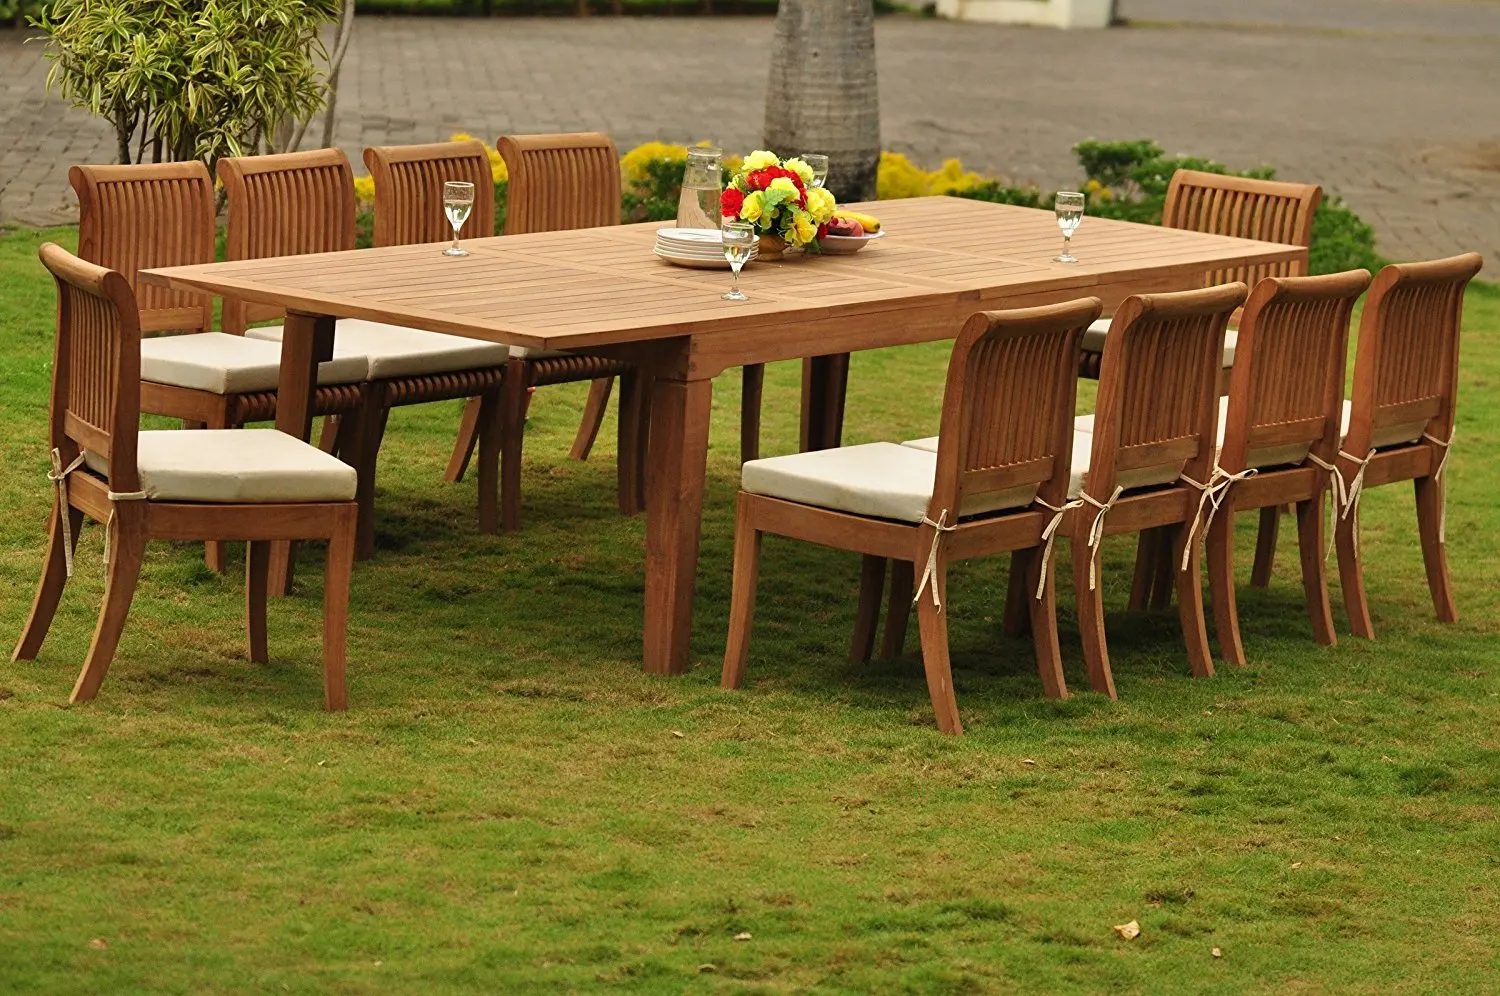 10 seater table